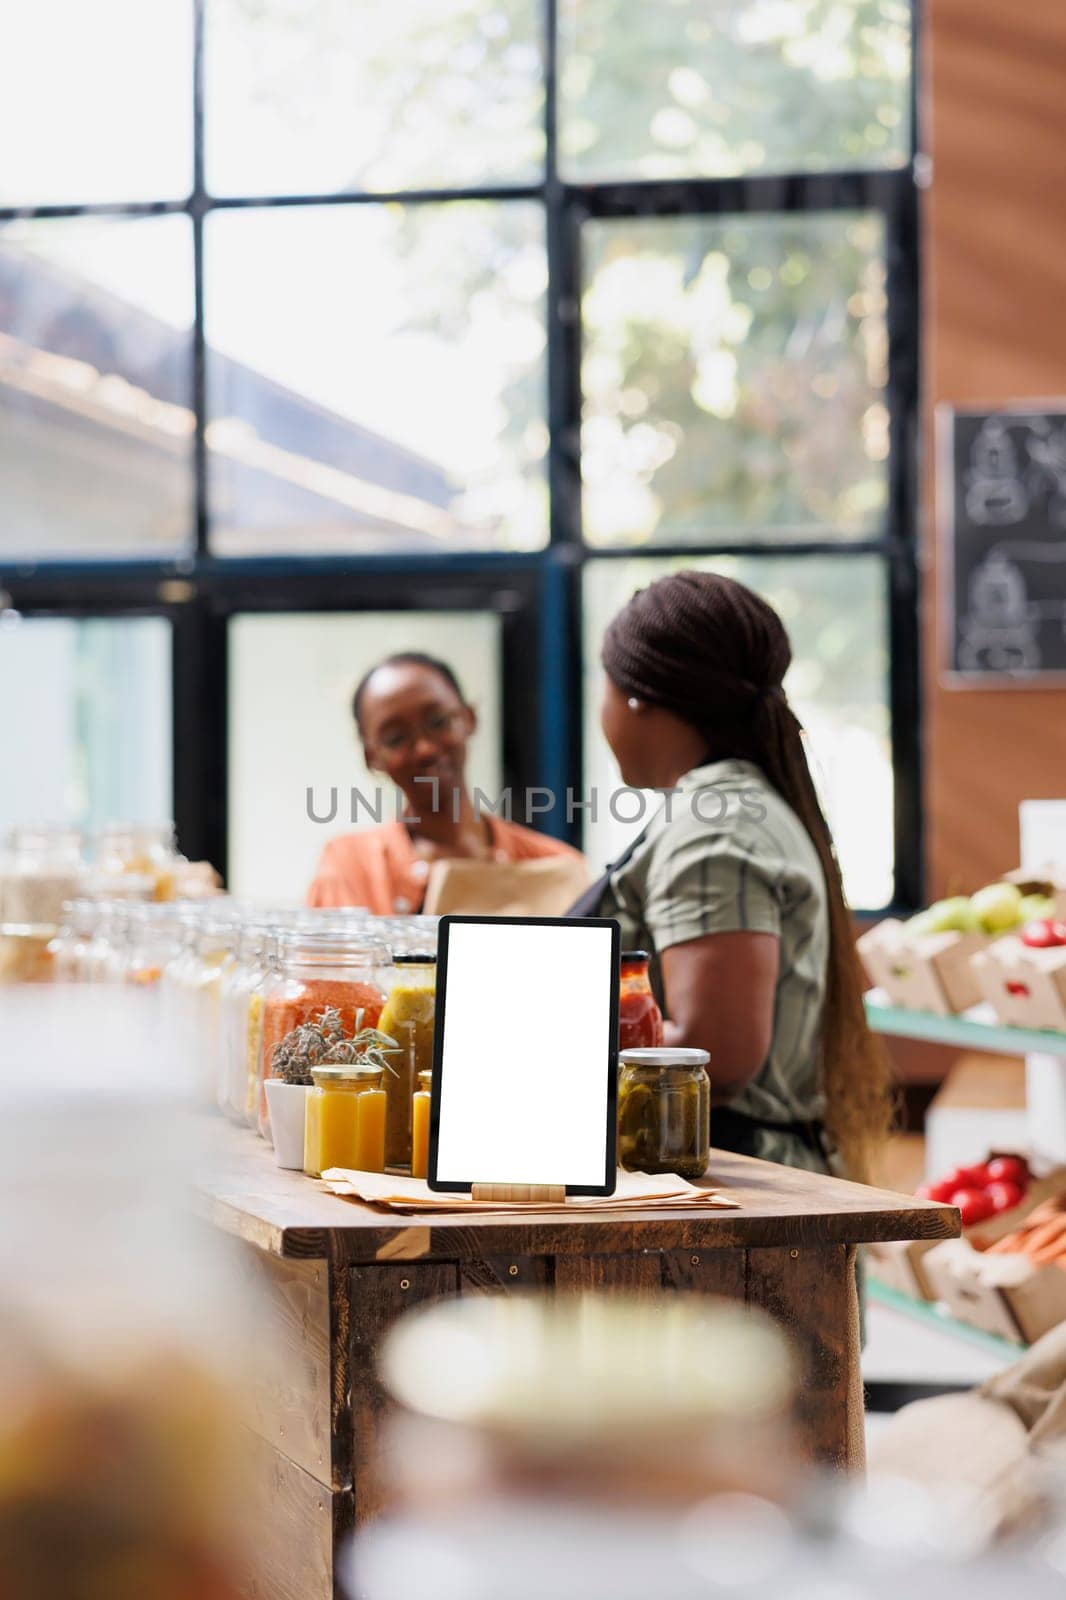 White screen on tablet displays an ad template promoting fresh, organic and sustainable food products in an eco-friendly marketplace. Vendor speaks with client while device shows blank mockup.